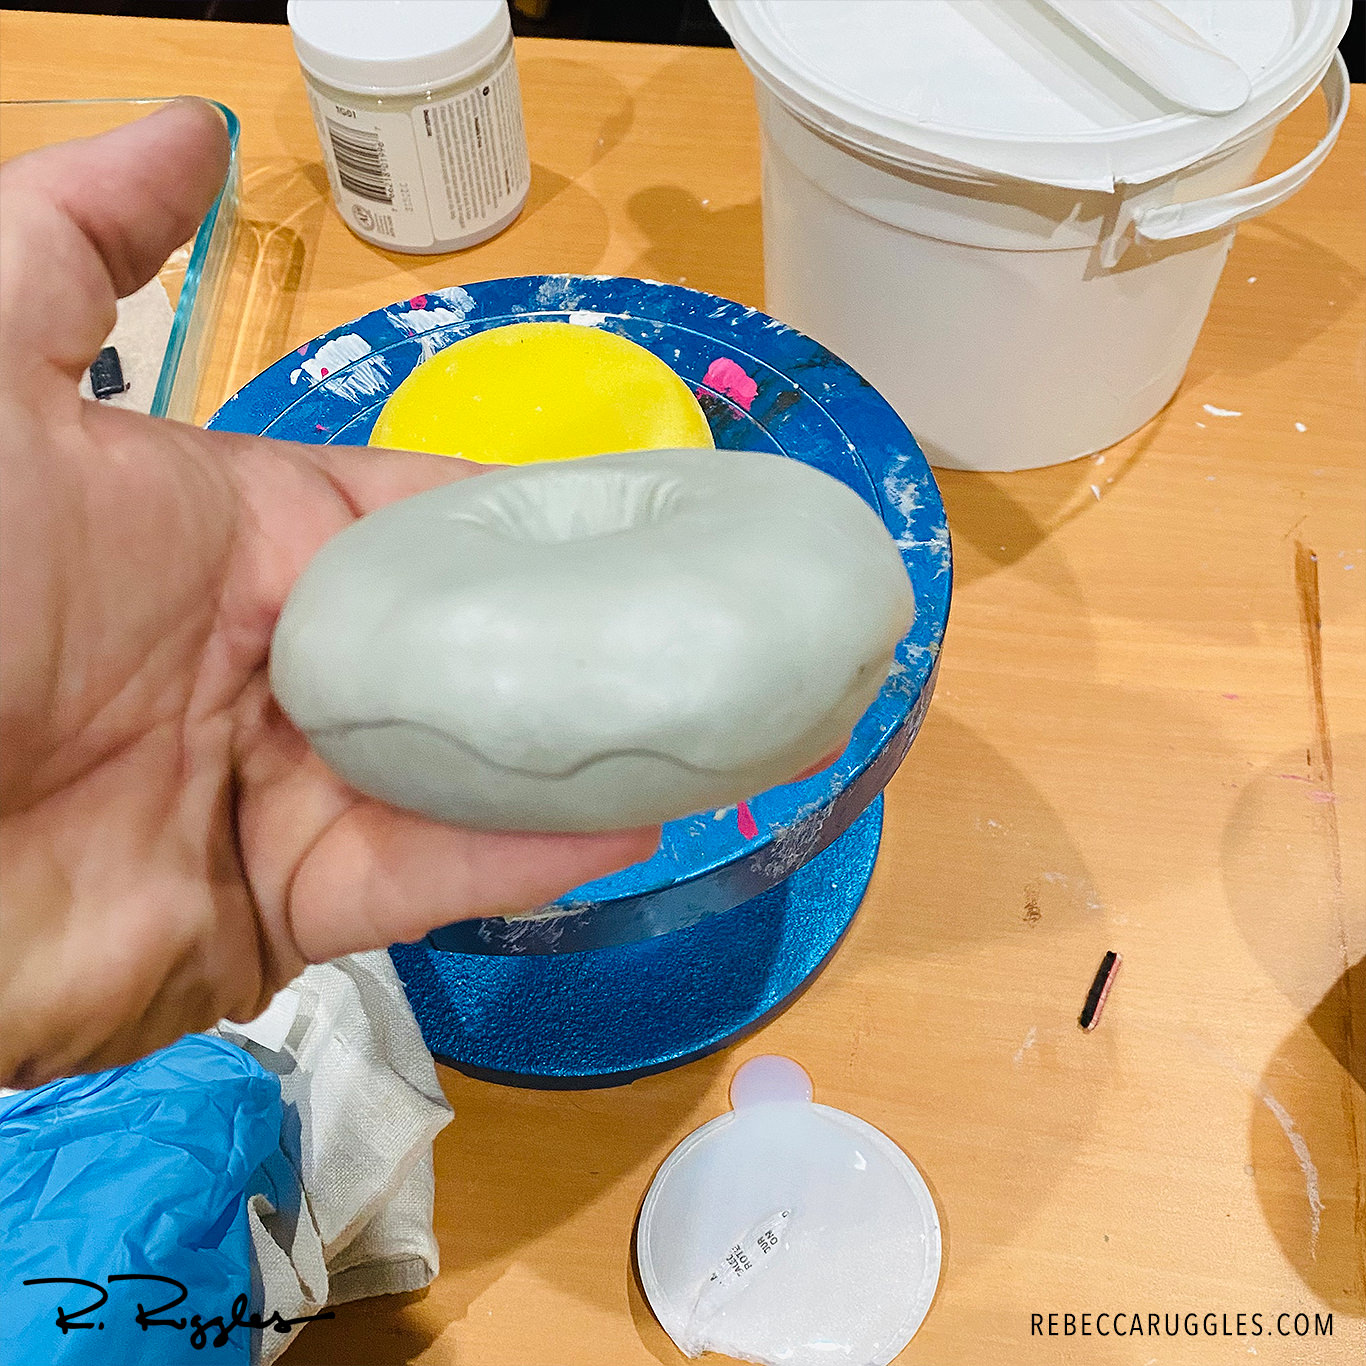 Sculpting the frosted doughnut.